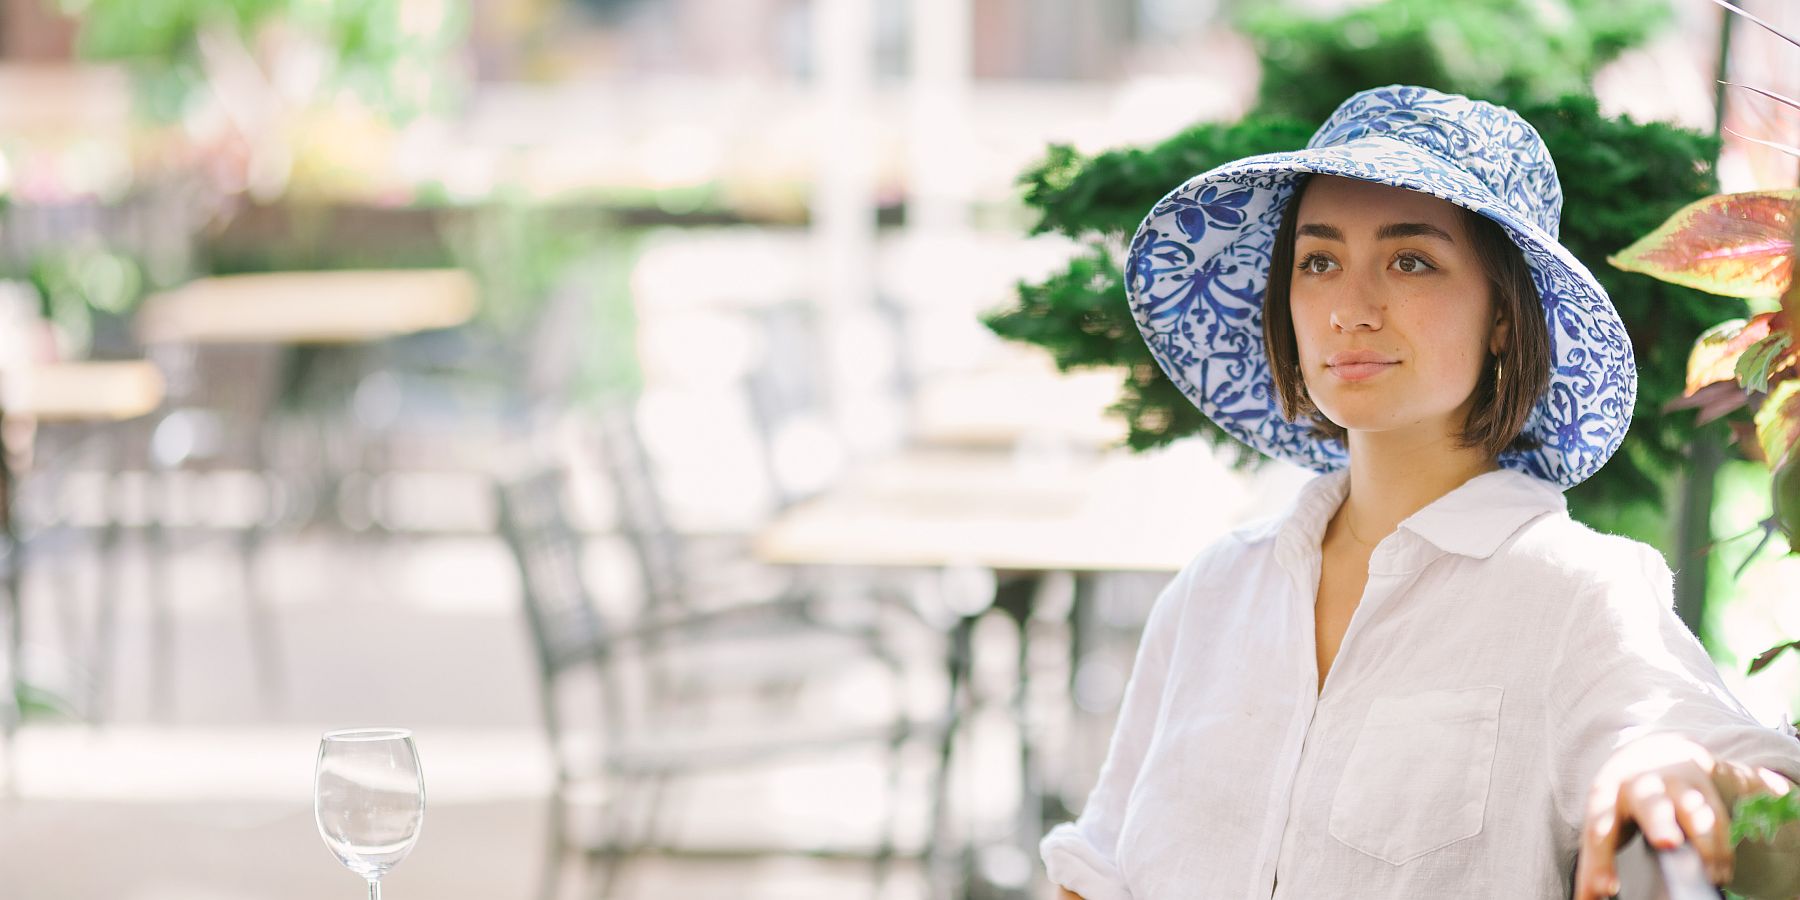 Quality Sun Protection Hats in beautiful linens, hemp and solar nylon.  Styles from ball caps to ultra wide brim hats.  Rated UPF50+ Excellent Sun Protection. Sustainably Made for over 25 years in Toronto Canada. Sun hats for infants, kids and adults.